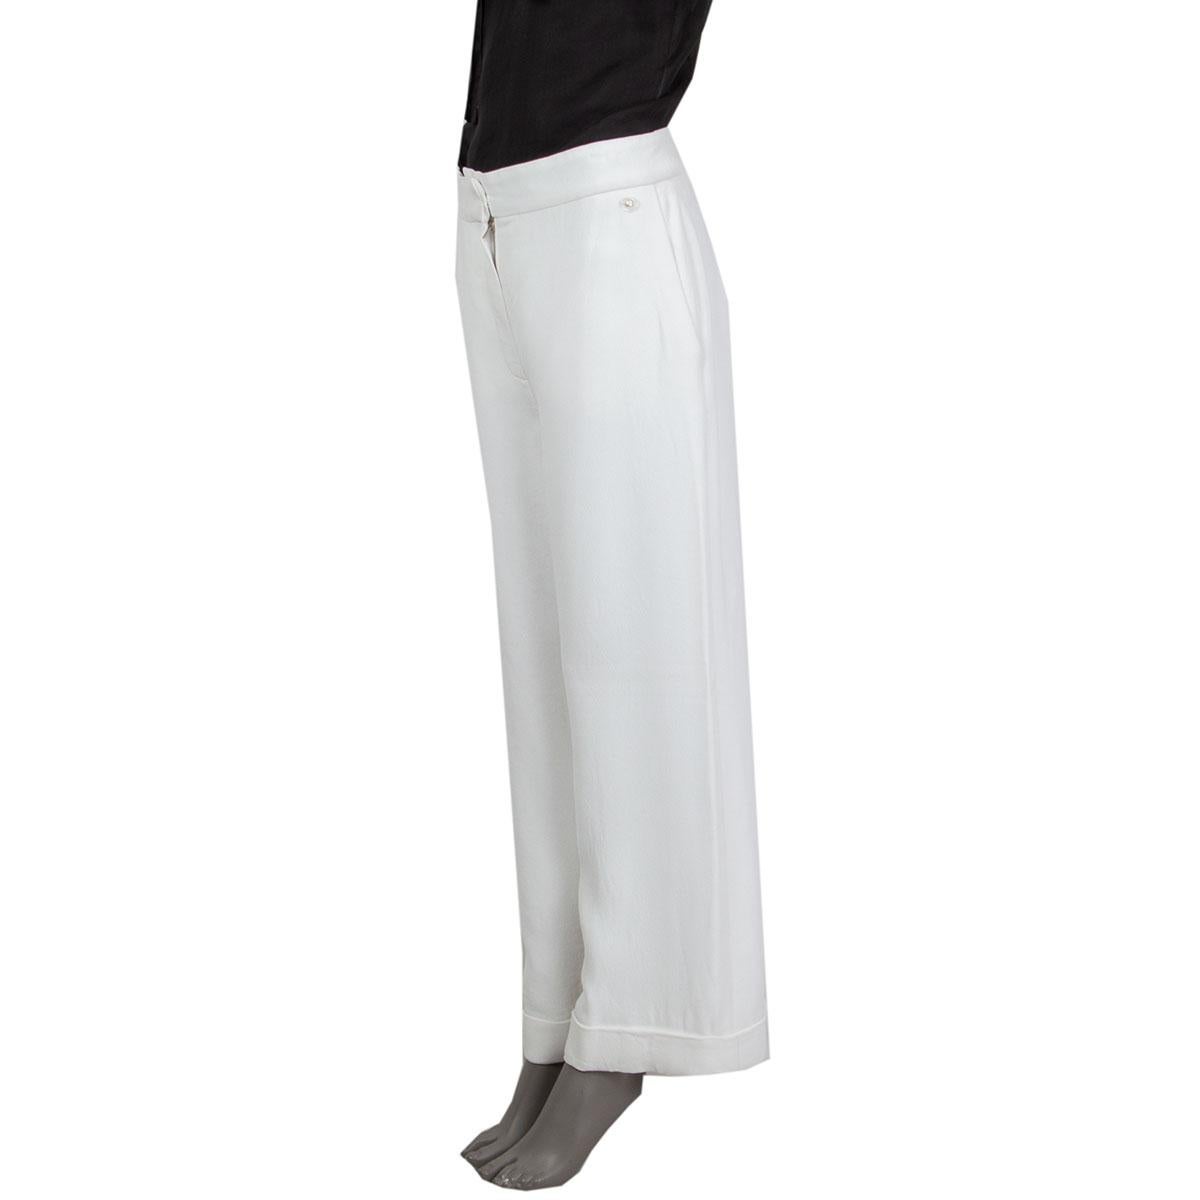 authentic Chanel wide-leg palazzo pants in white viscose (100%) with a high rise, two side pockets in the front and a CC-logo pearl stitched on the left, heavy weight. Lined in white fabric. Closes with a concealed zipper in the front. Has been worn